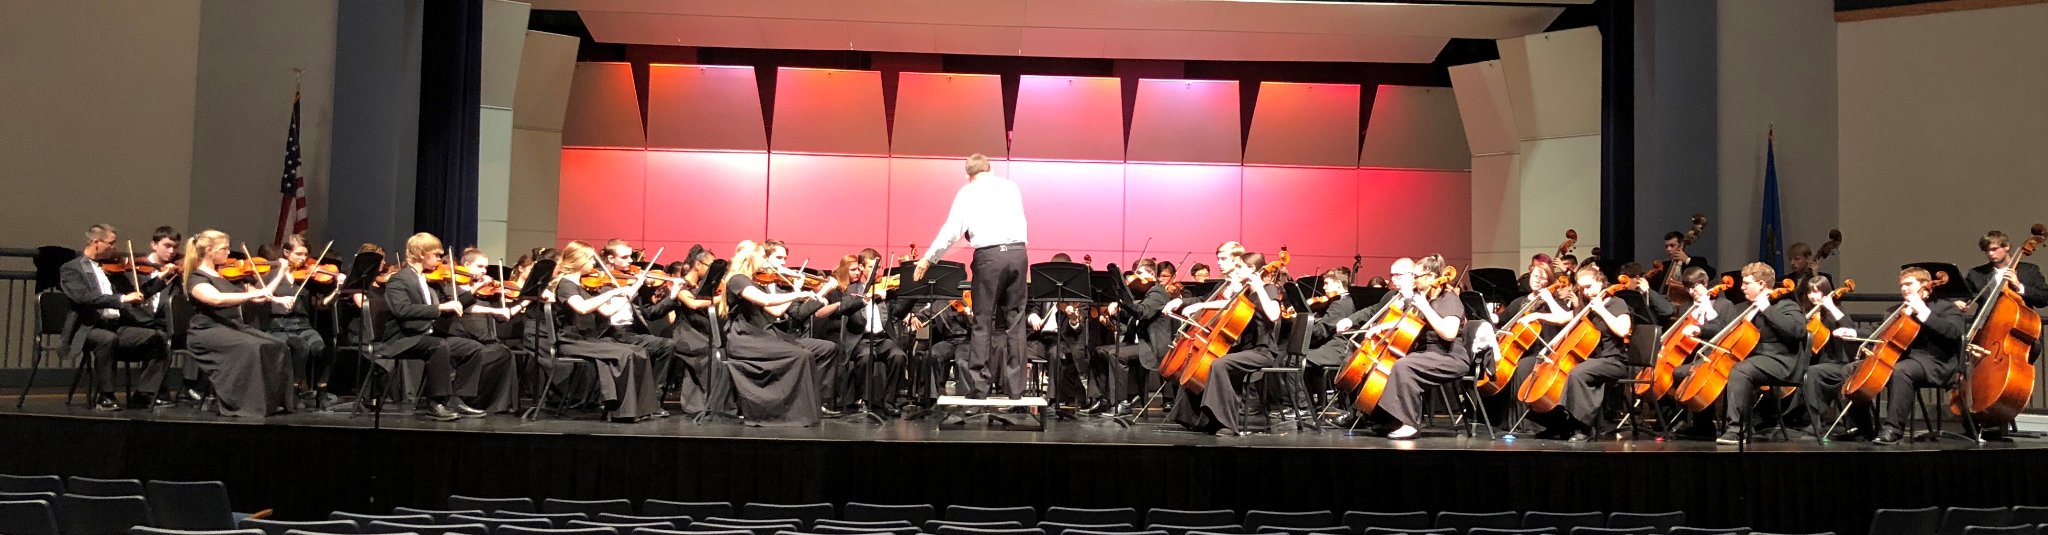 Ponca City and Stillwater High Schools Combined Fall Concert is Tuesday